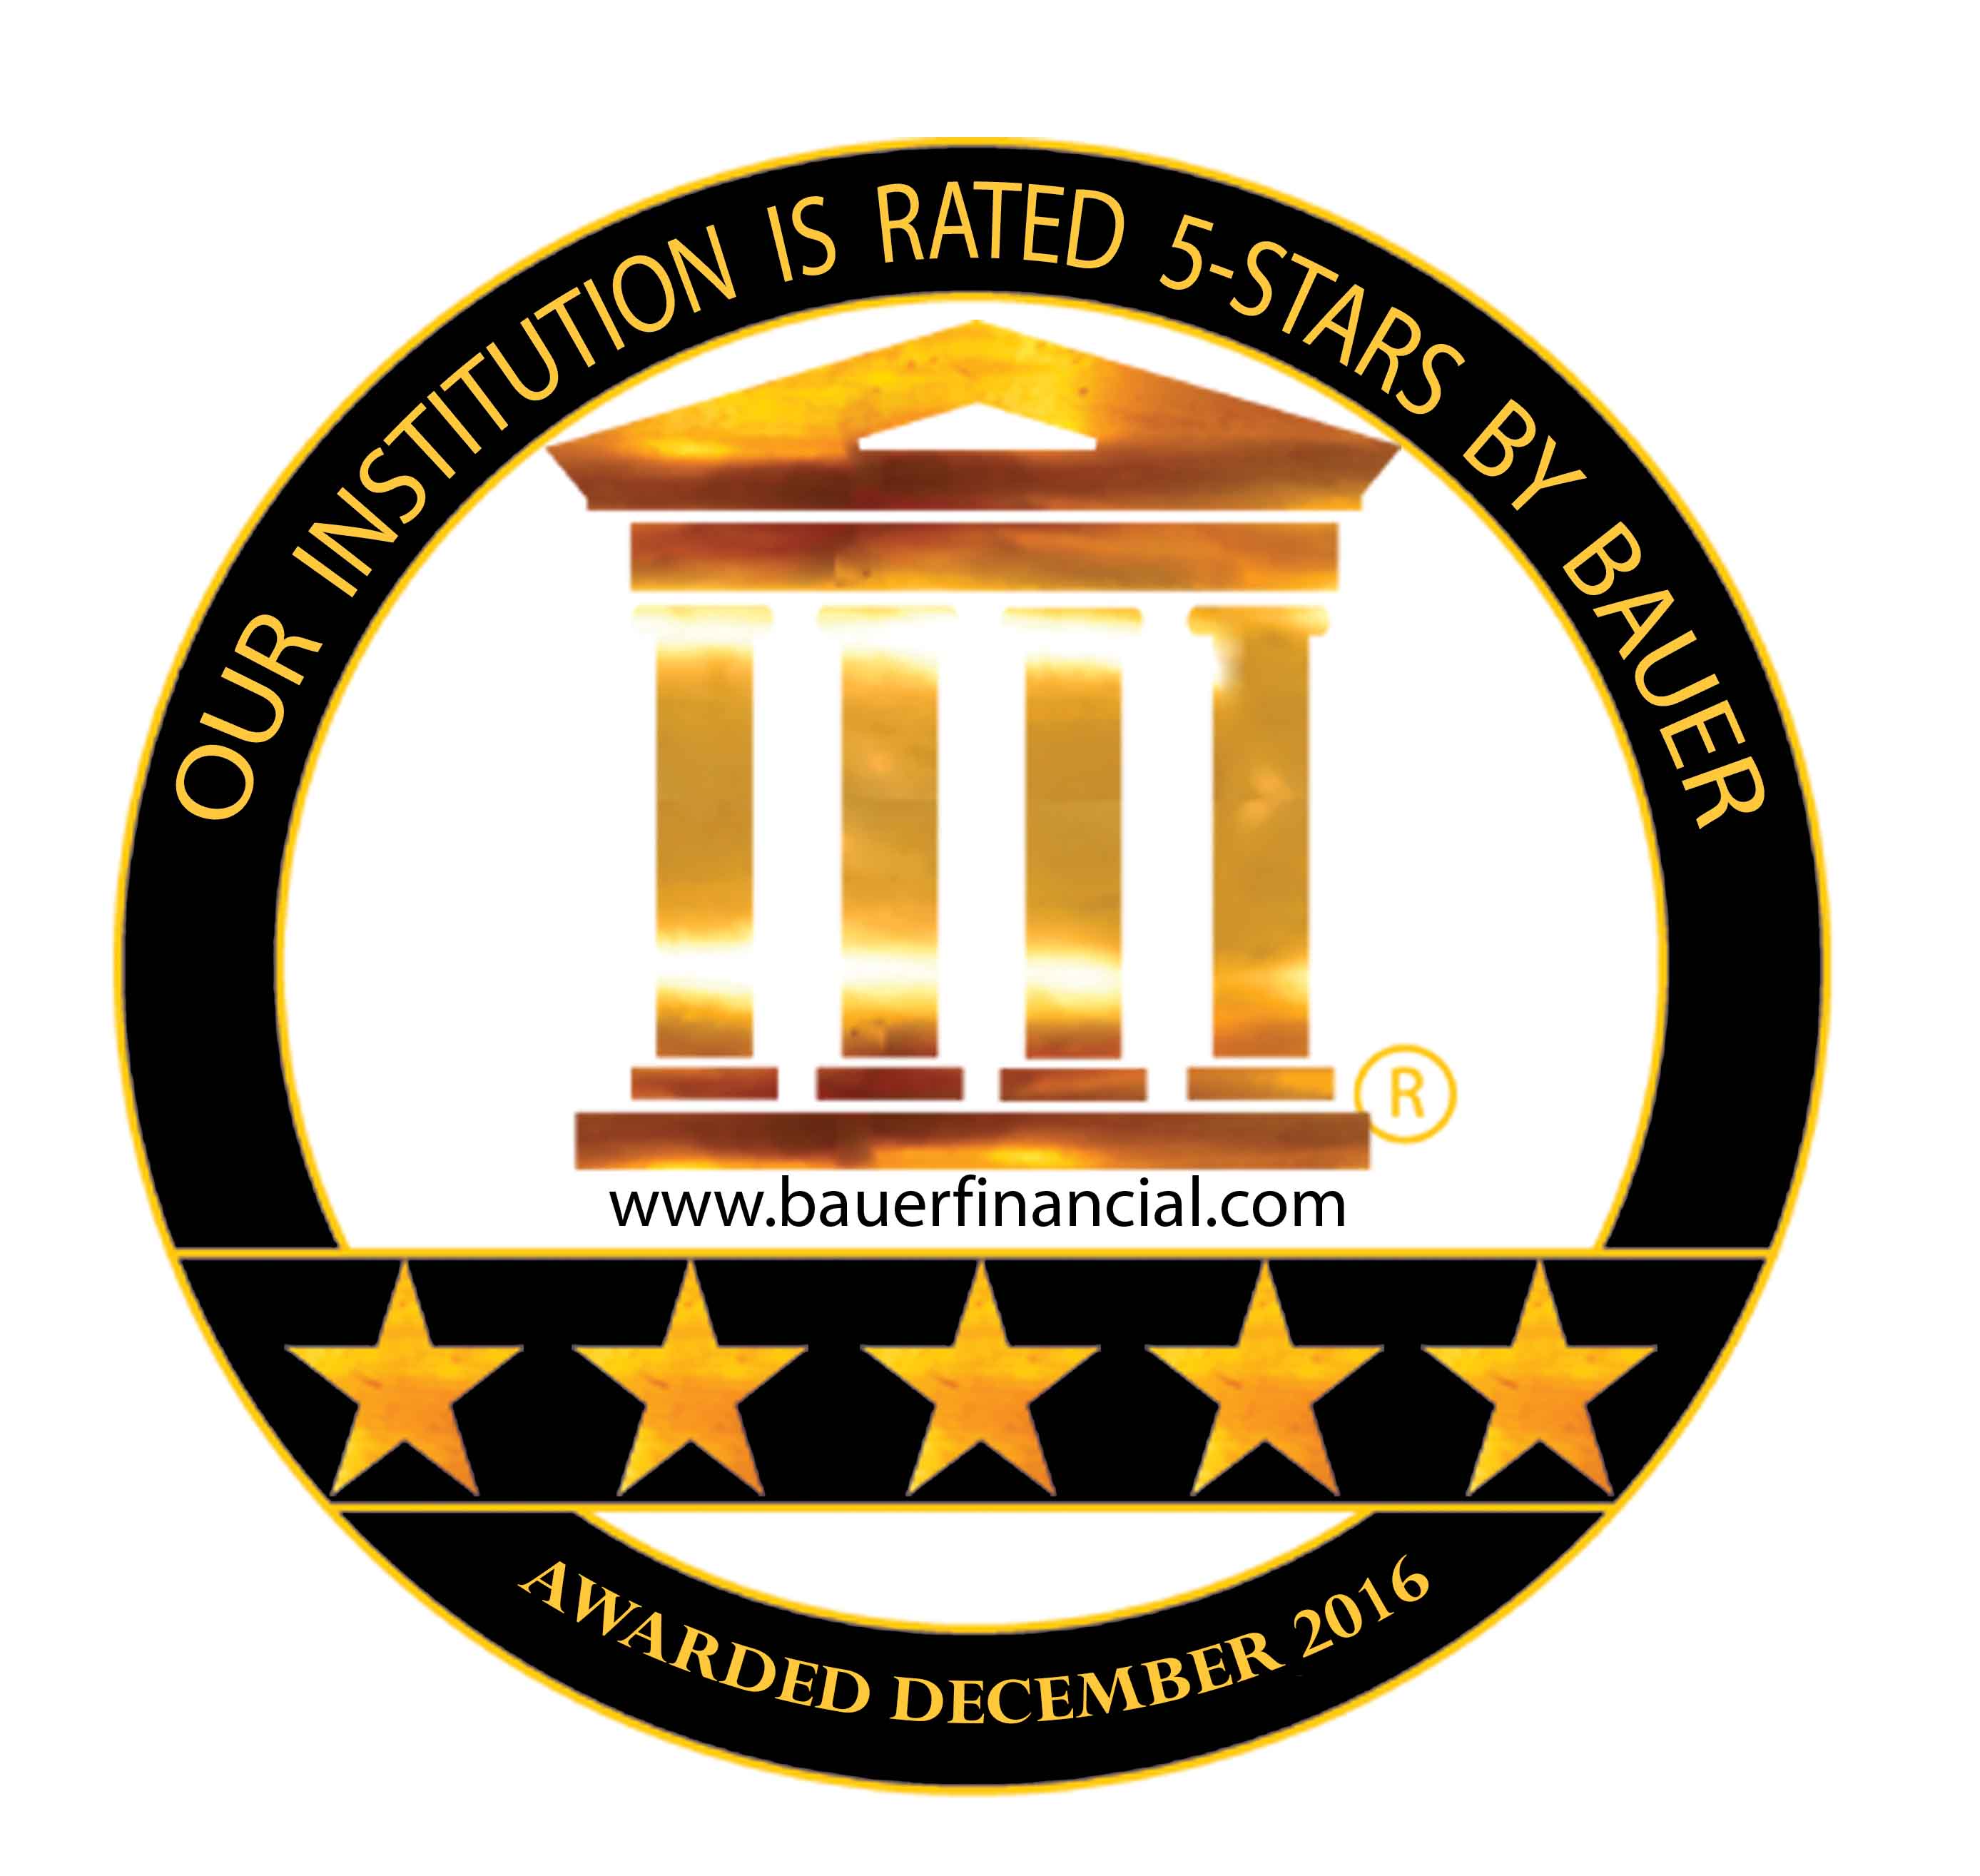 bauer-financial-5-star-rated